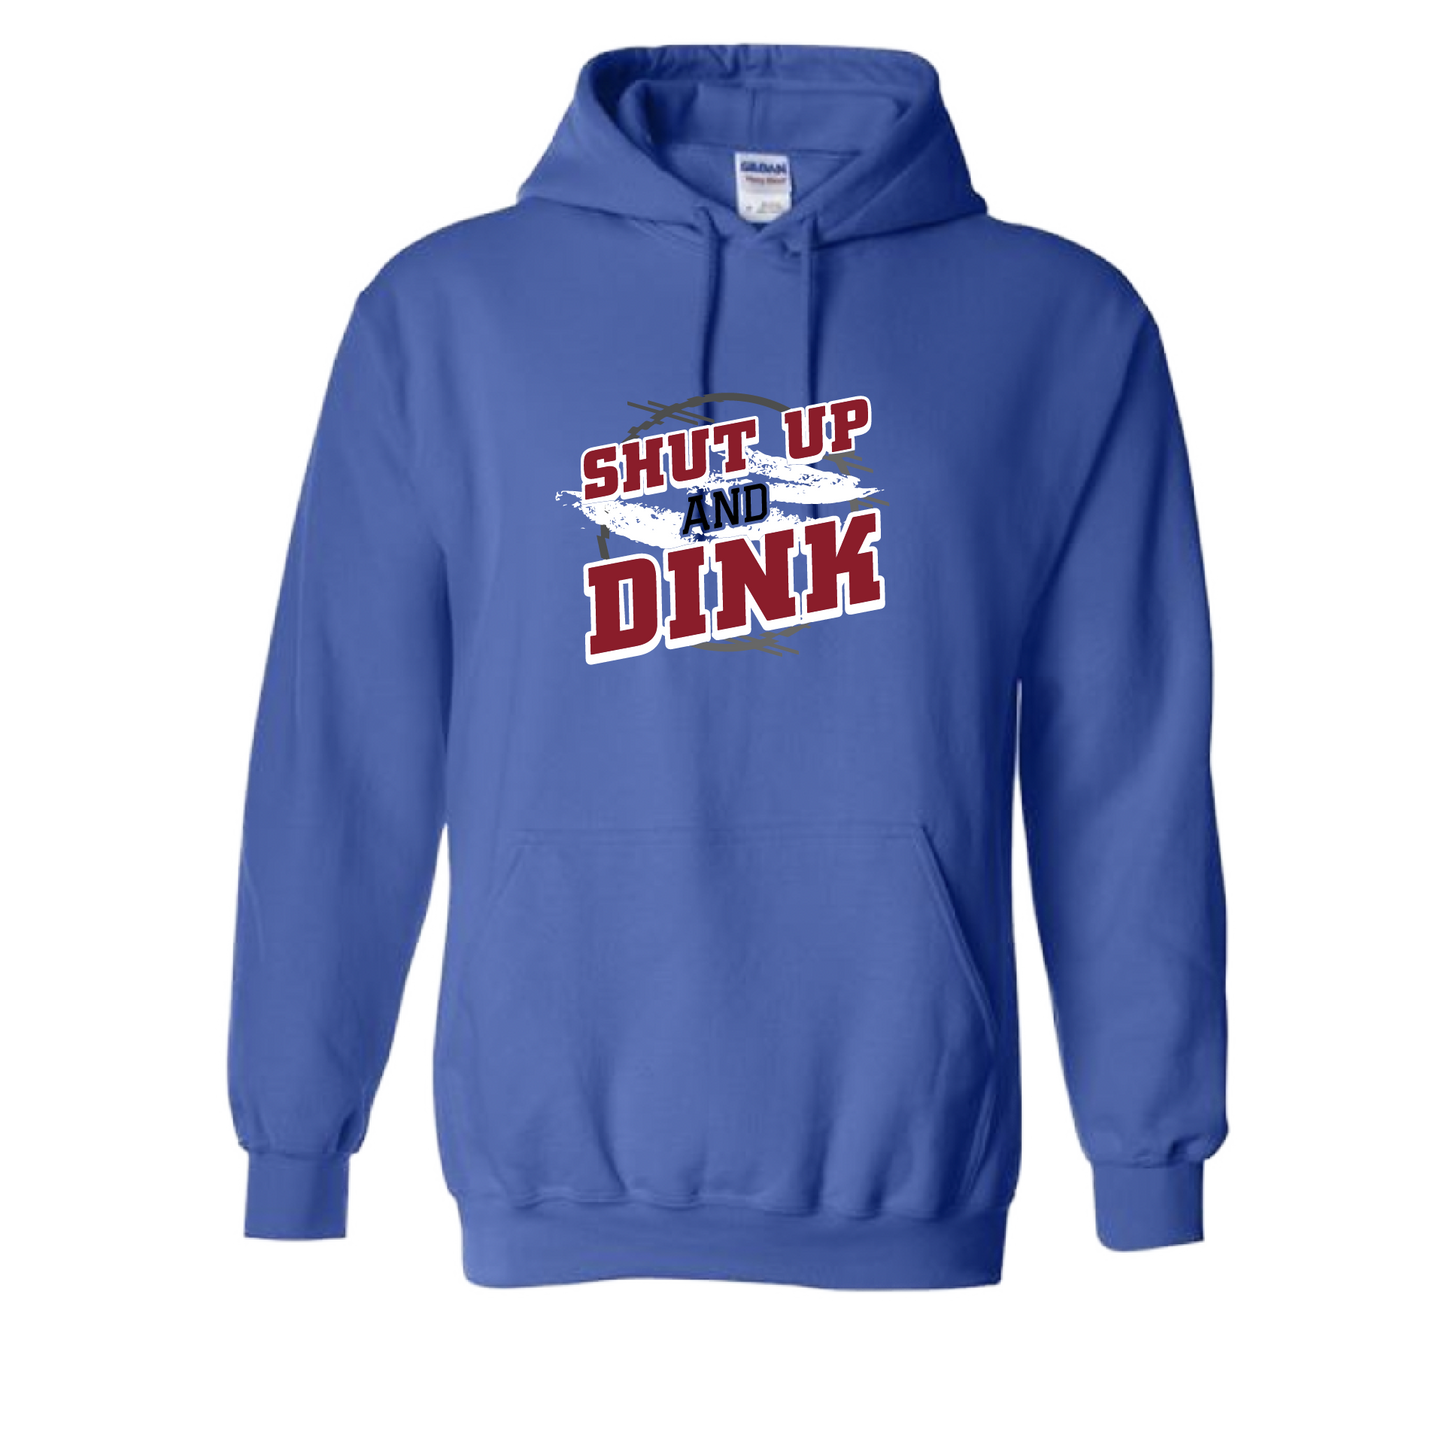 Pickleball Design: Shut Up and Dink  Unisex Hooded Sweatshirt: Moisture-wicking, double-lined hood, front pouch pocket.  This unisex hooded sweatshirt is ultra comfortable and soft. Stay warm on the Pickleball courts while being that hit with this one of kind design.